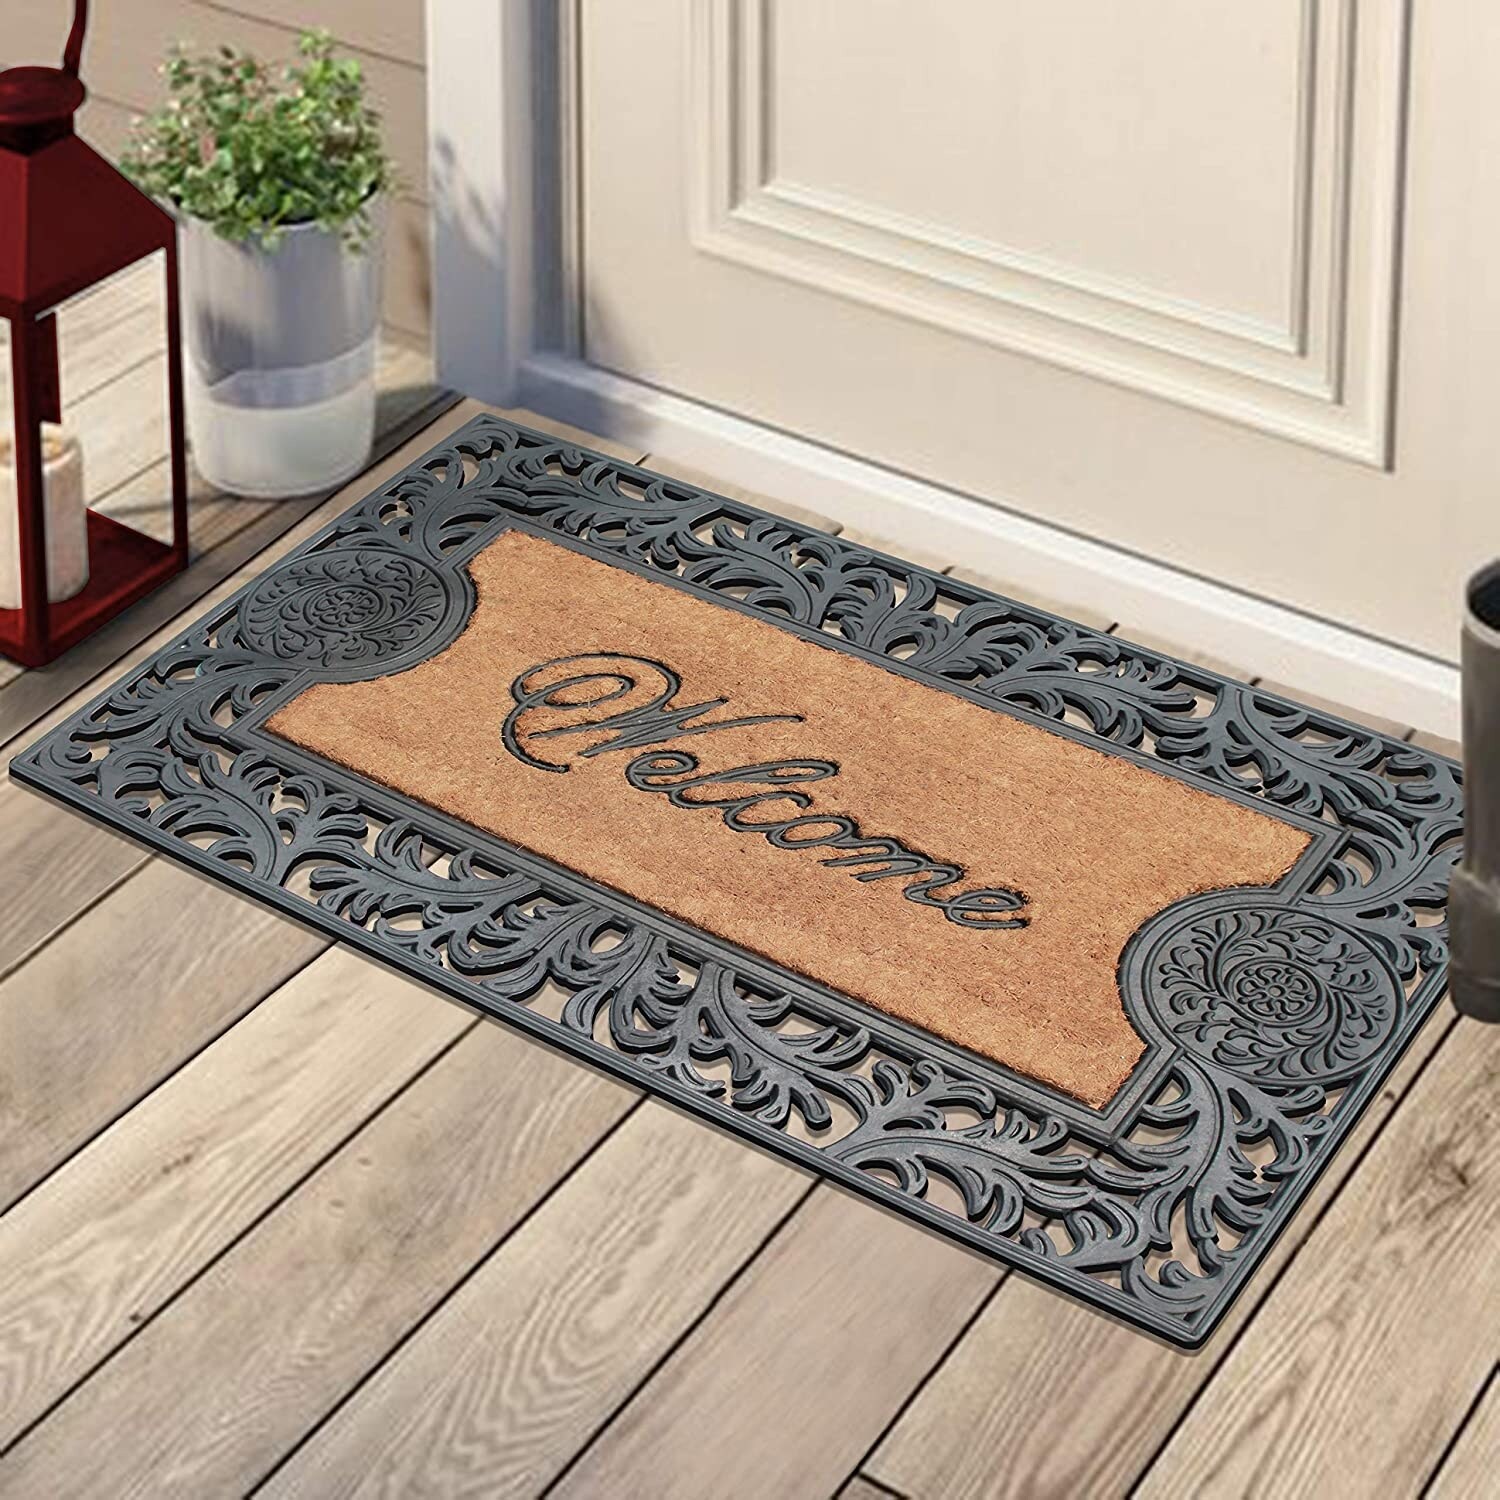 A1hc Welcome Border Beige 24 in x 39 in Rubber and Coir Heavy-Duty Outdoor Entrance Durable Doormat